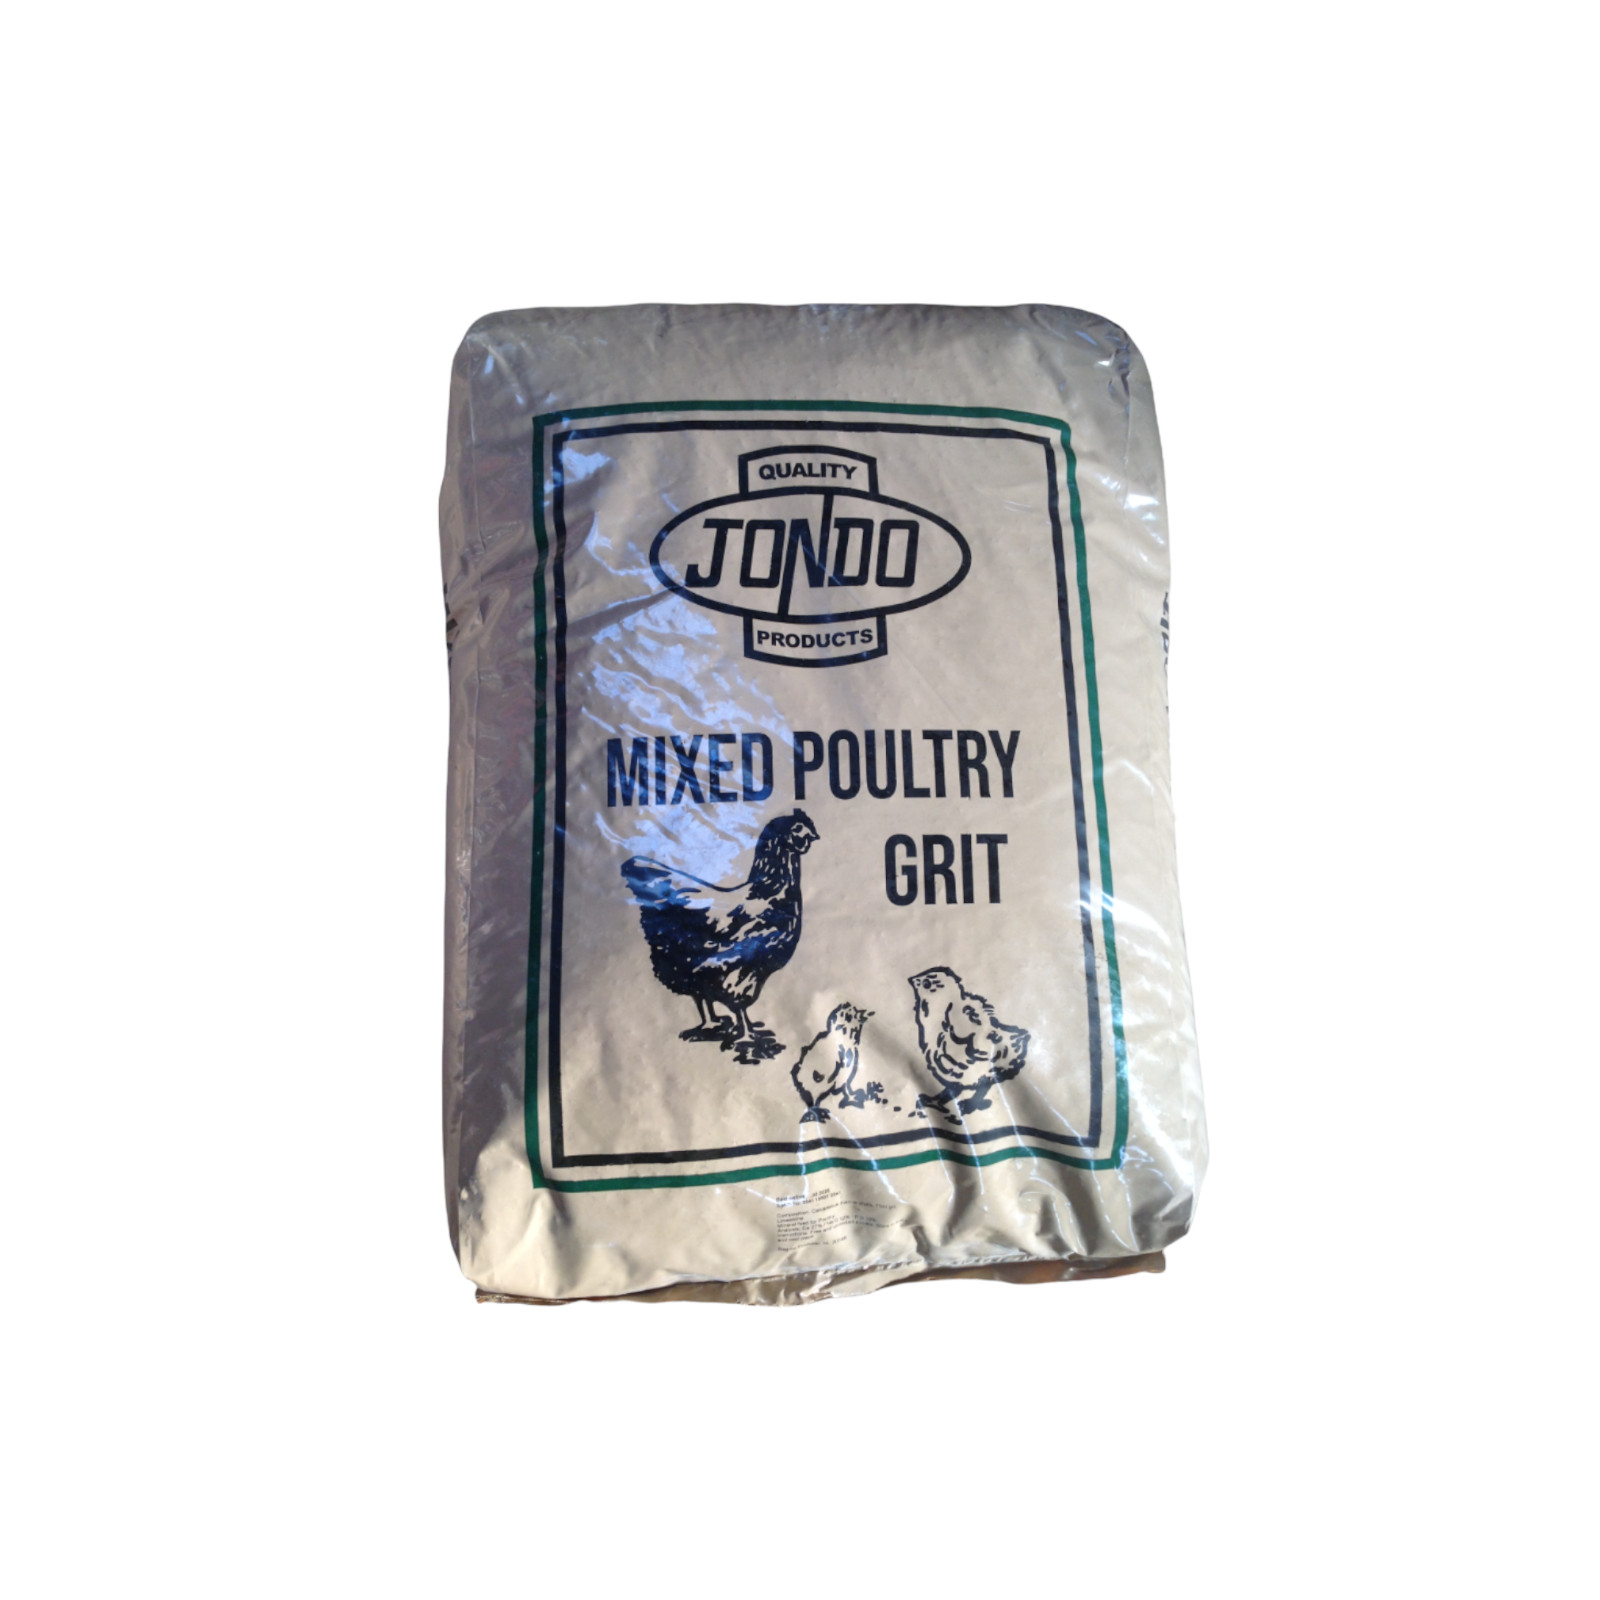 Jondo Mixed Poultry Grit